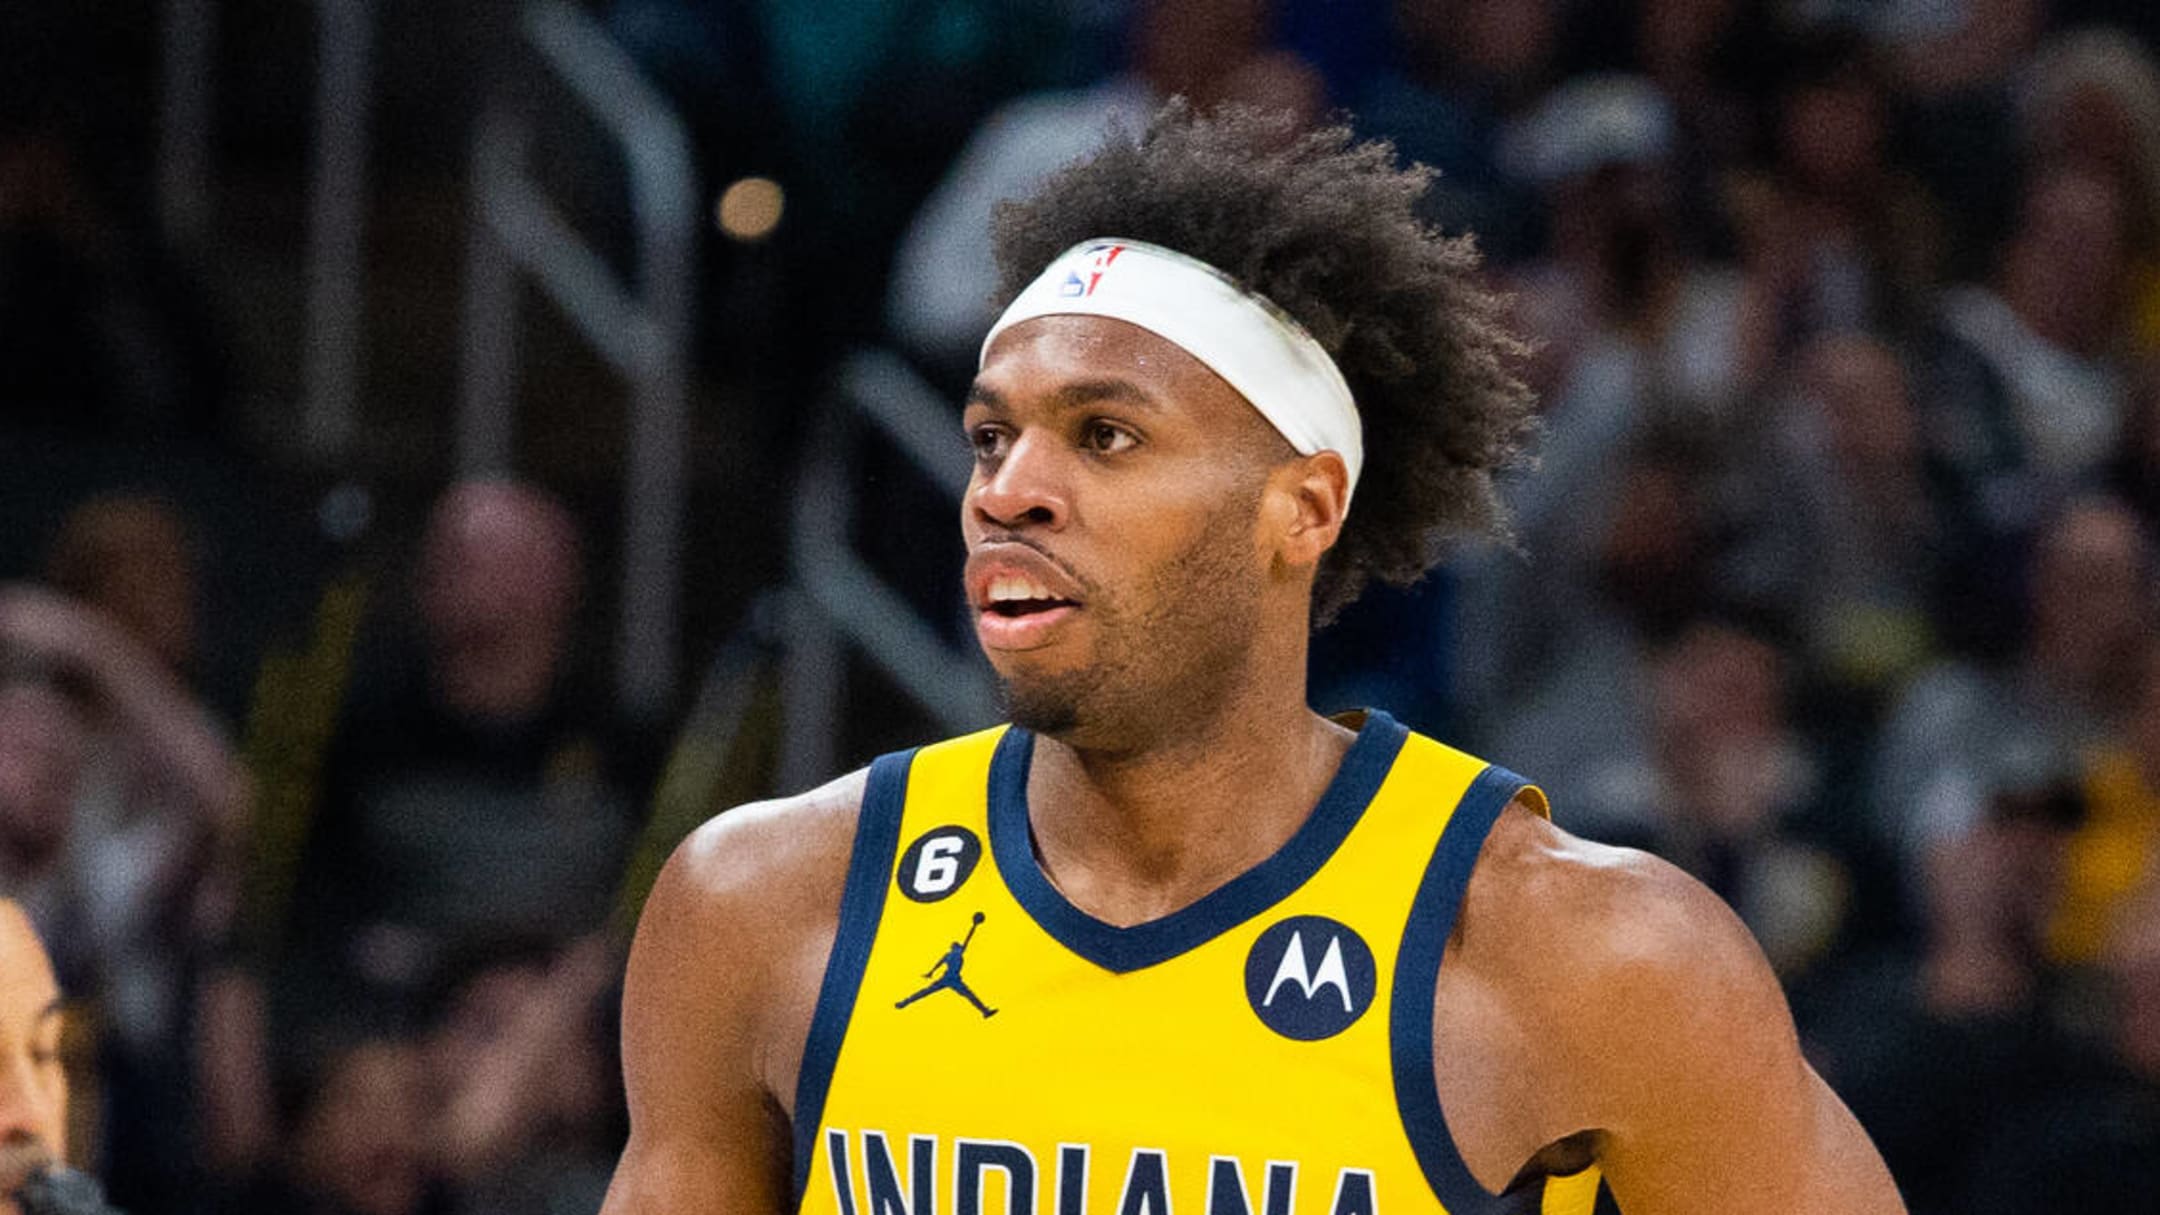 BREAKING: Buddy Hield and the Pacers are working on a trade to